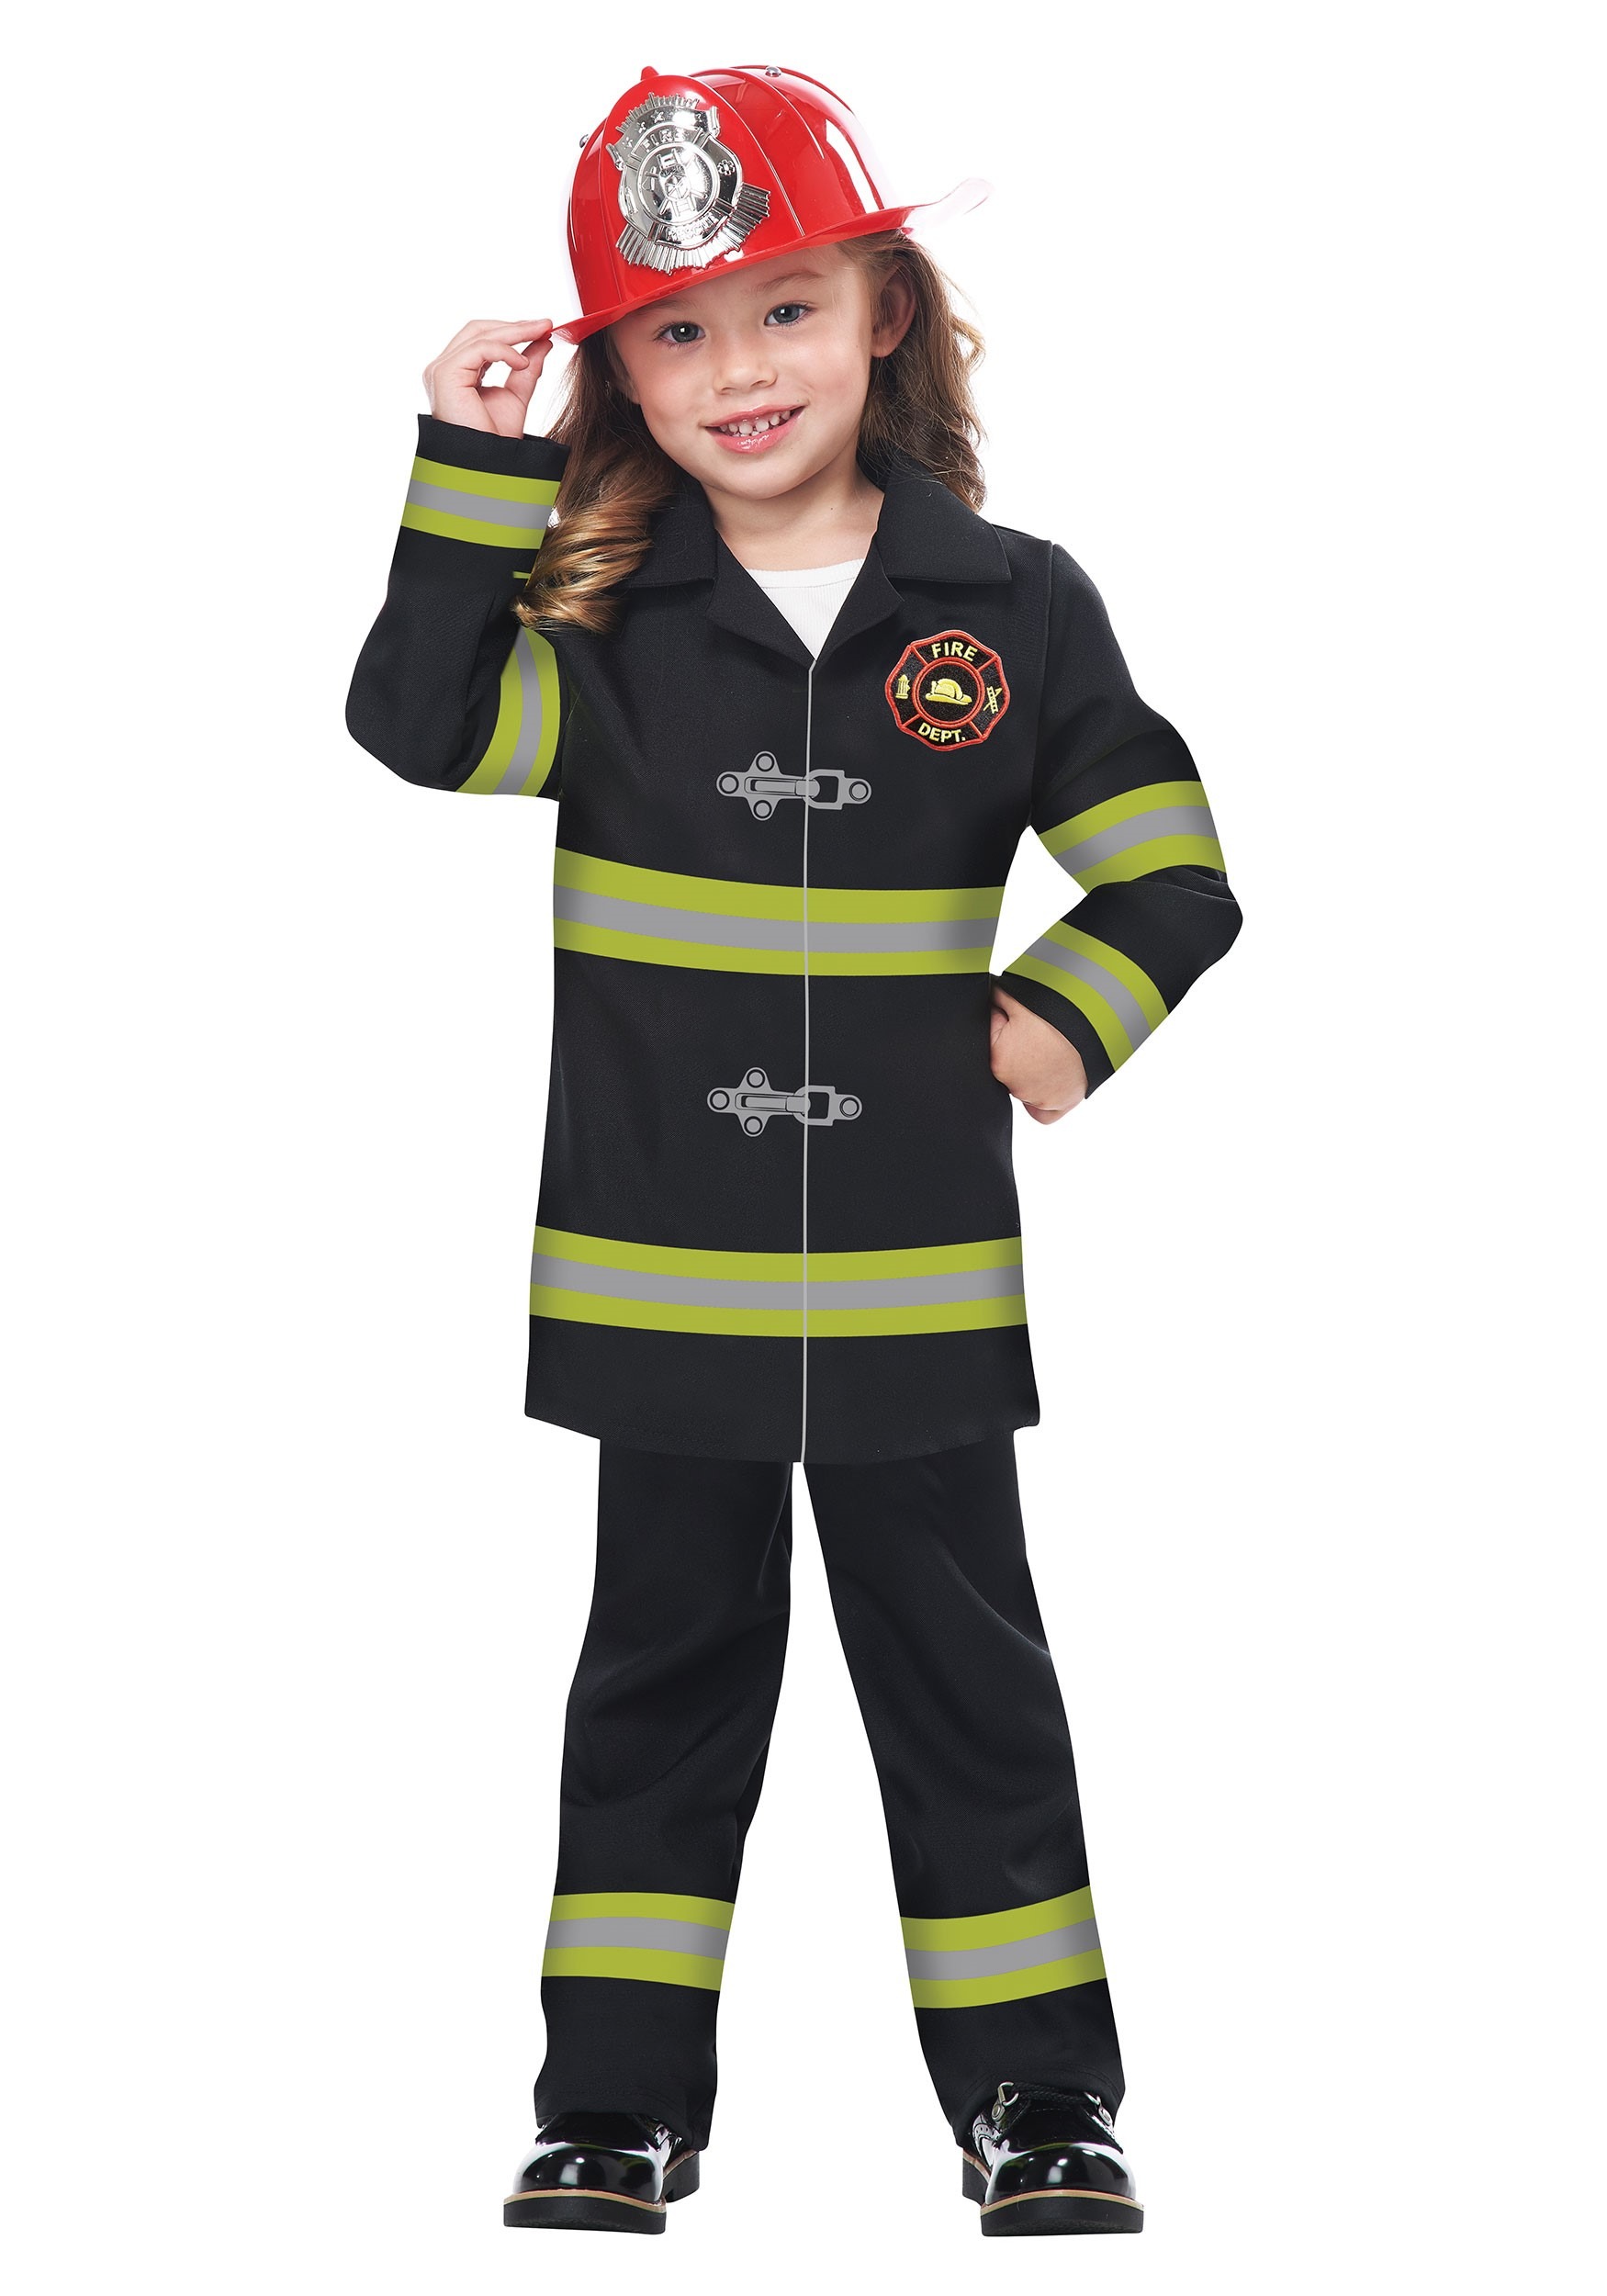 Jr Fire Chief Costume For Toddlers